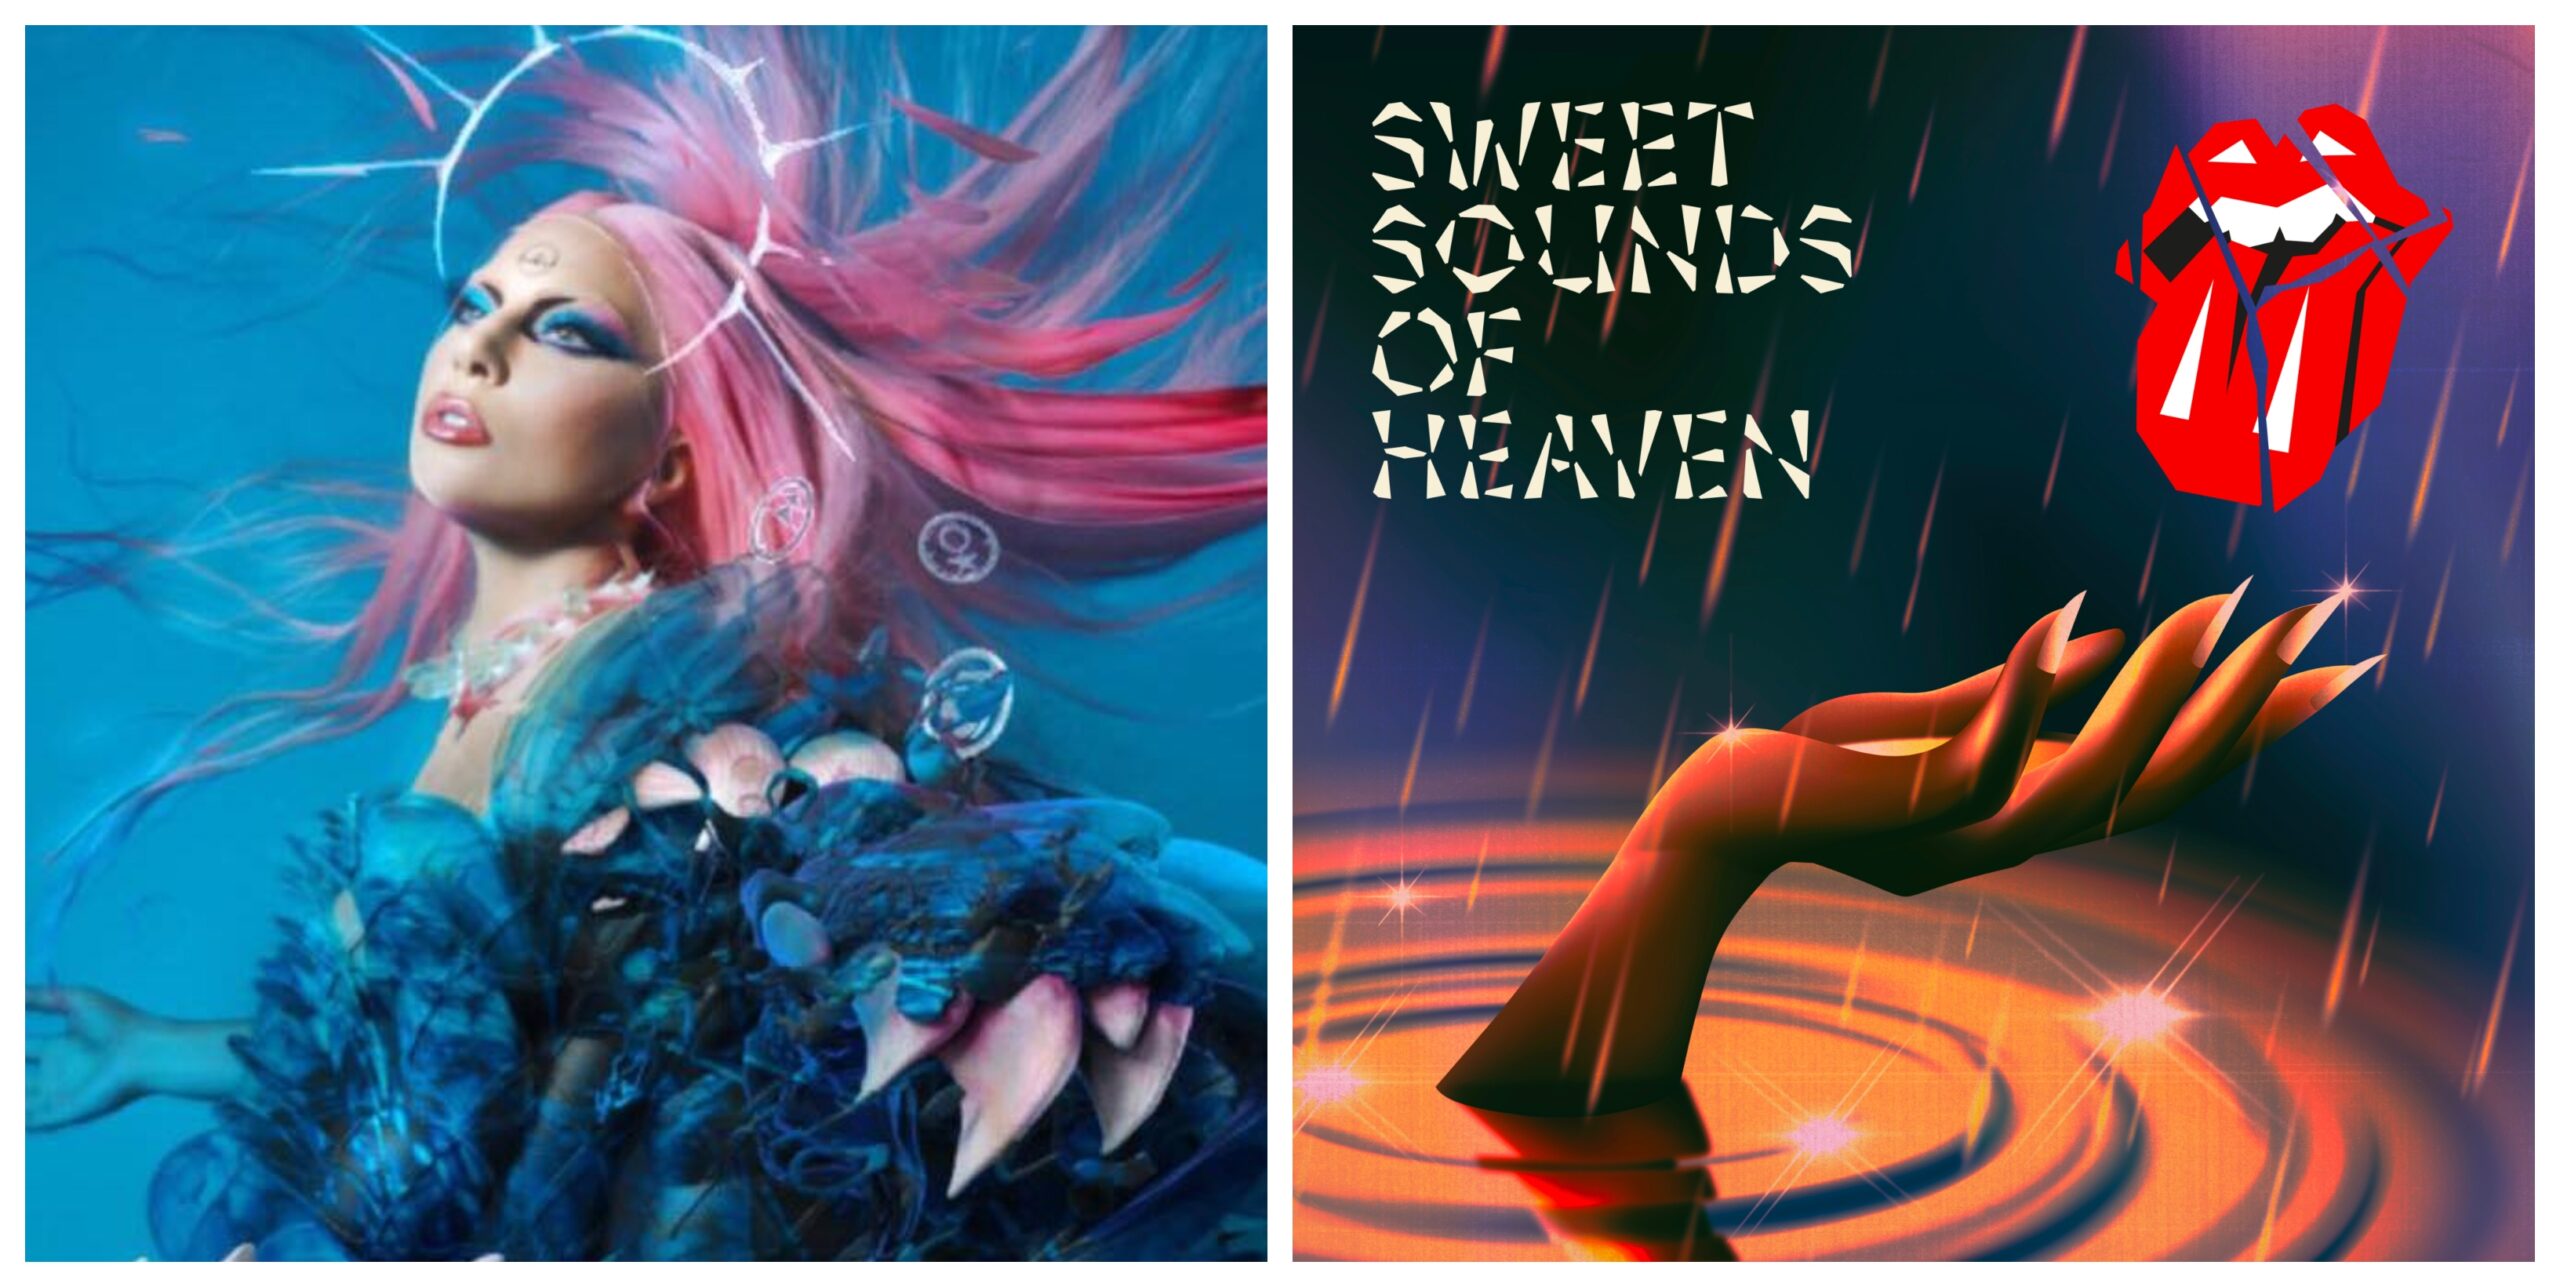 New Song: The Rolling Stones & Lady Gaga – ‘Sweet Sounds of Heaven’